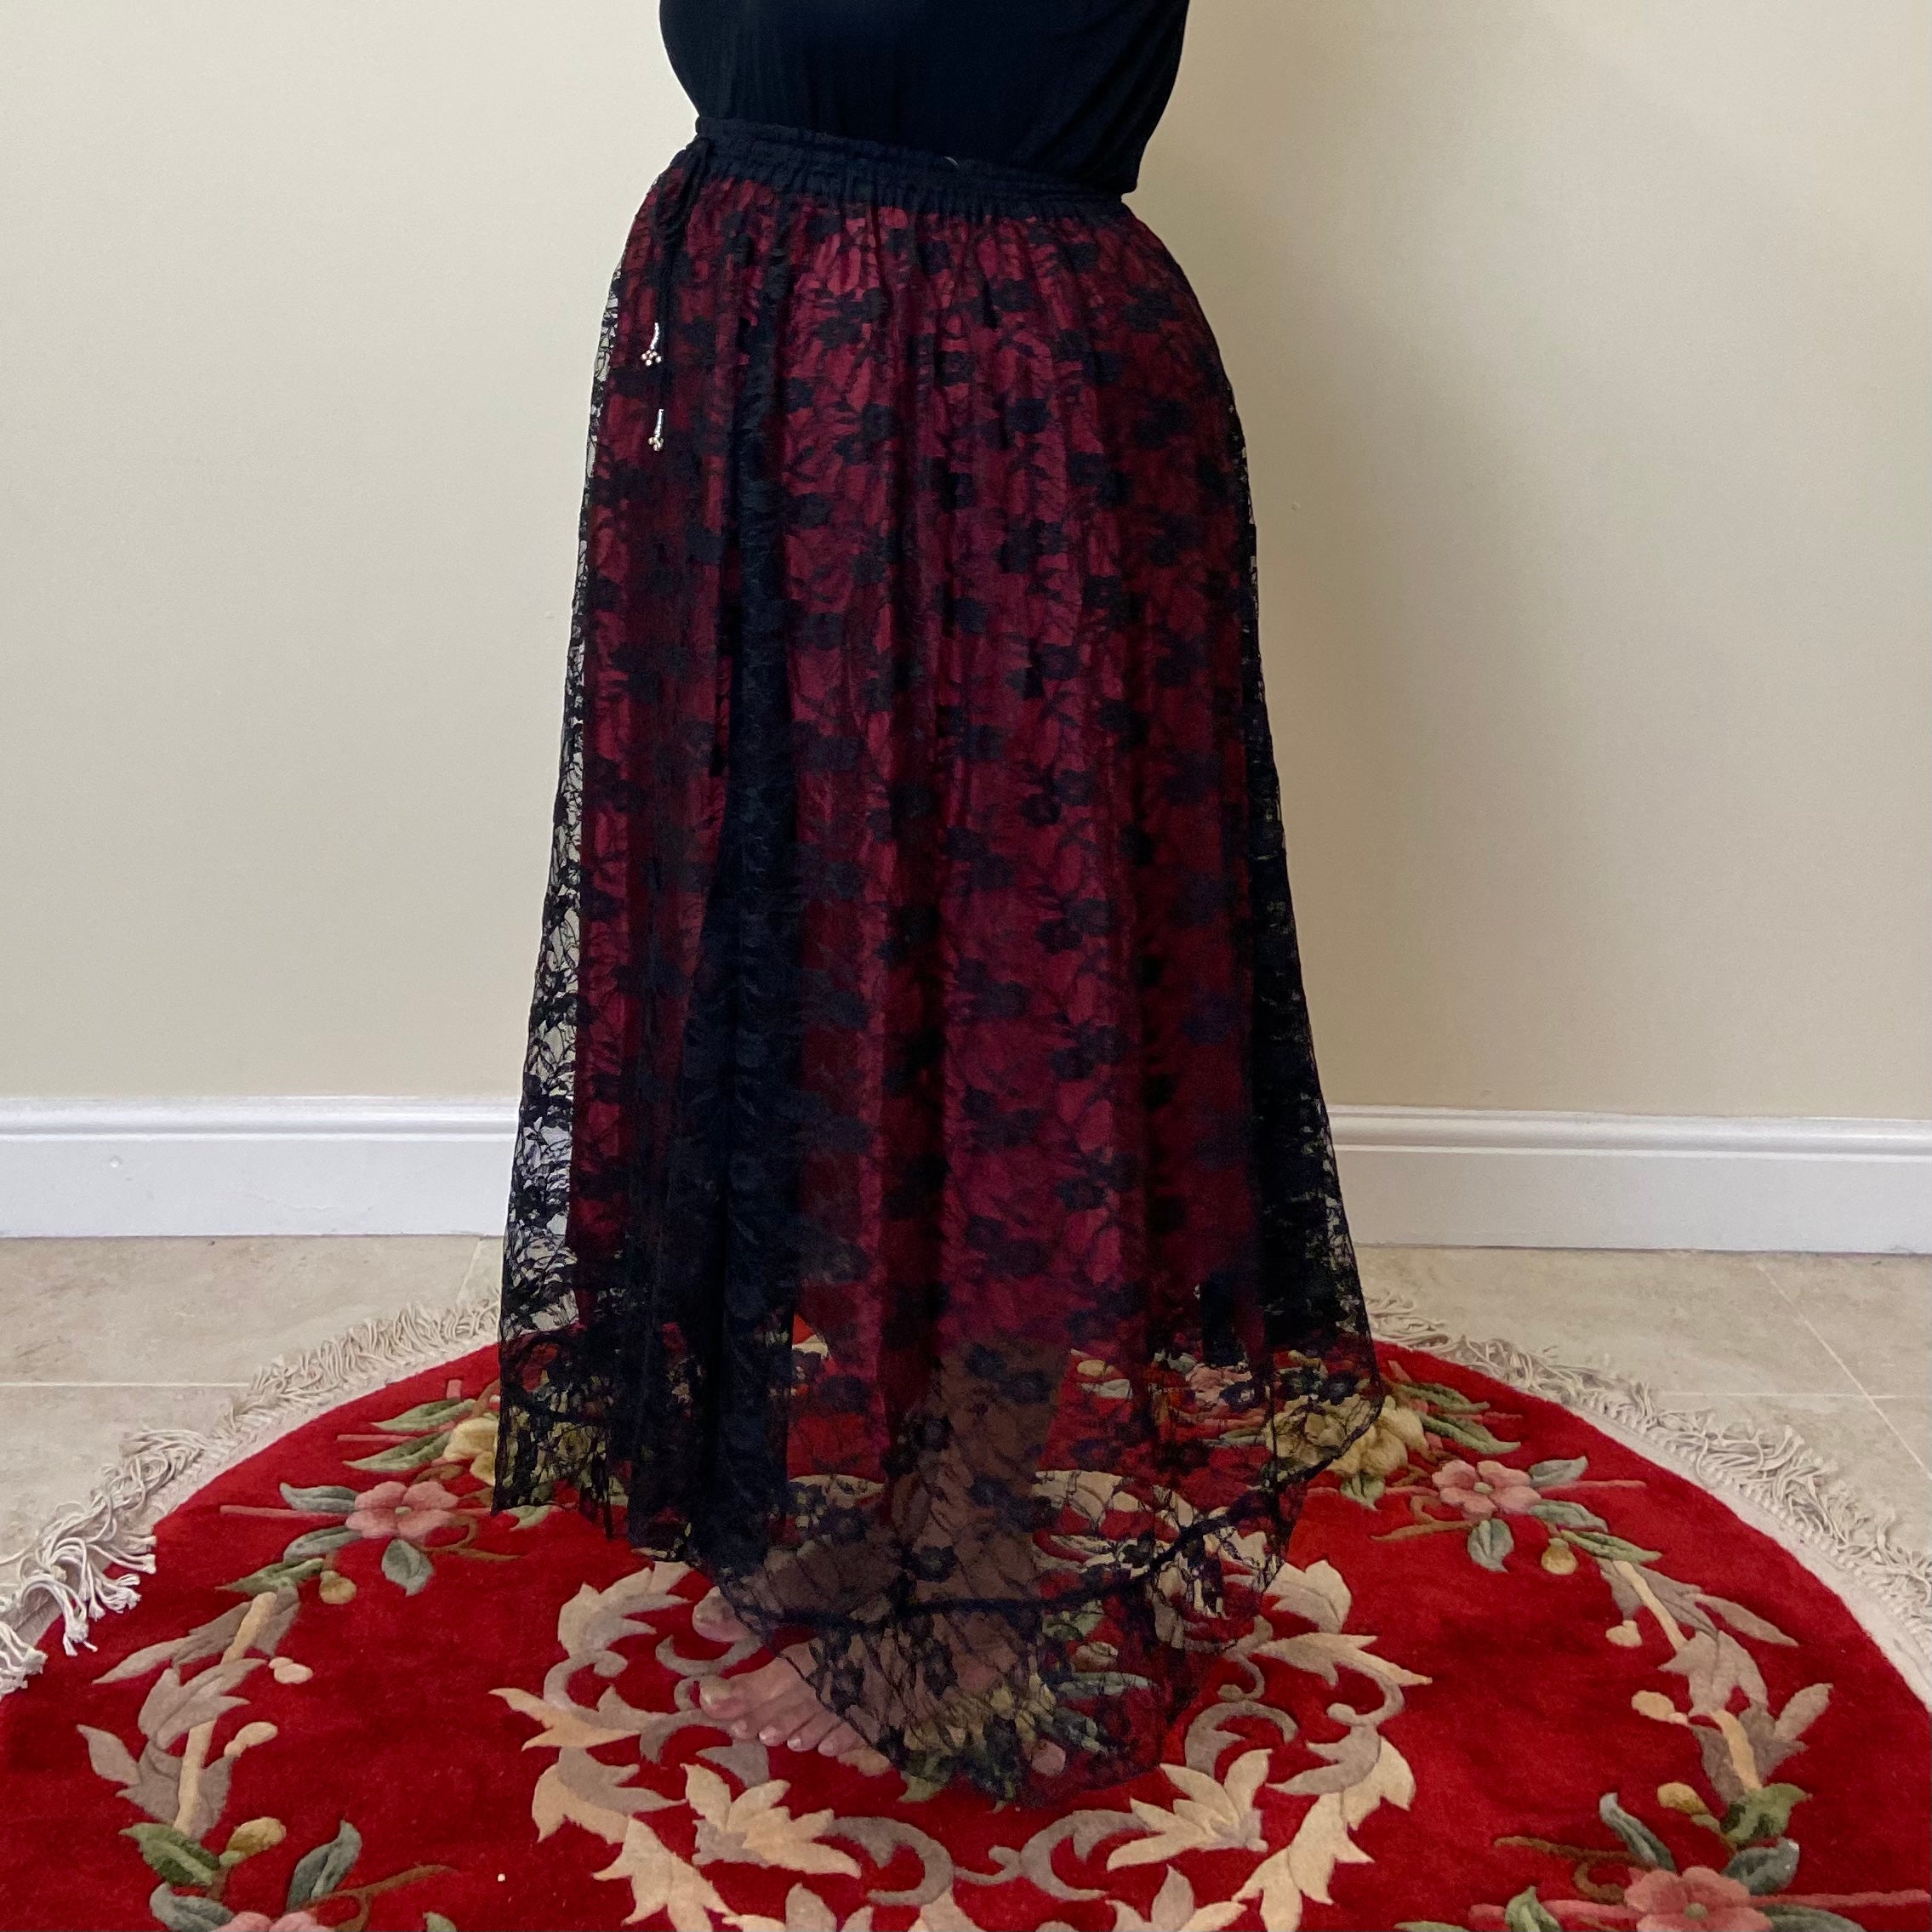 Lace Overlay Maxi Skirt - Red & Black